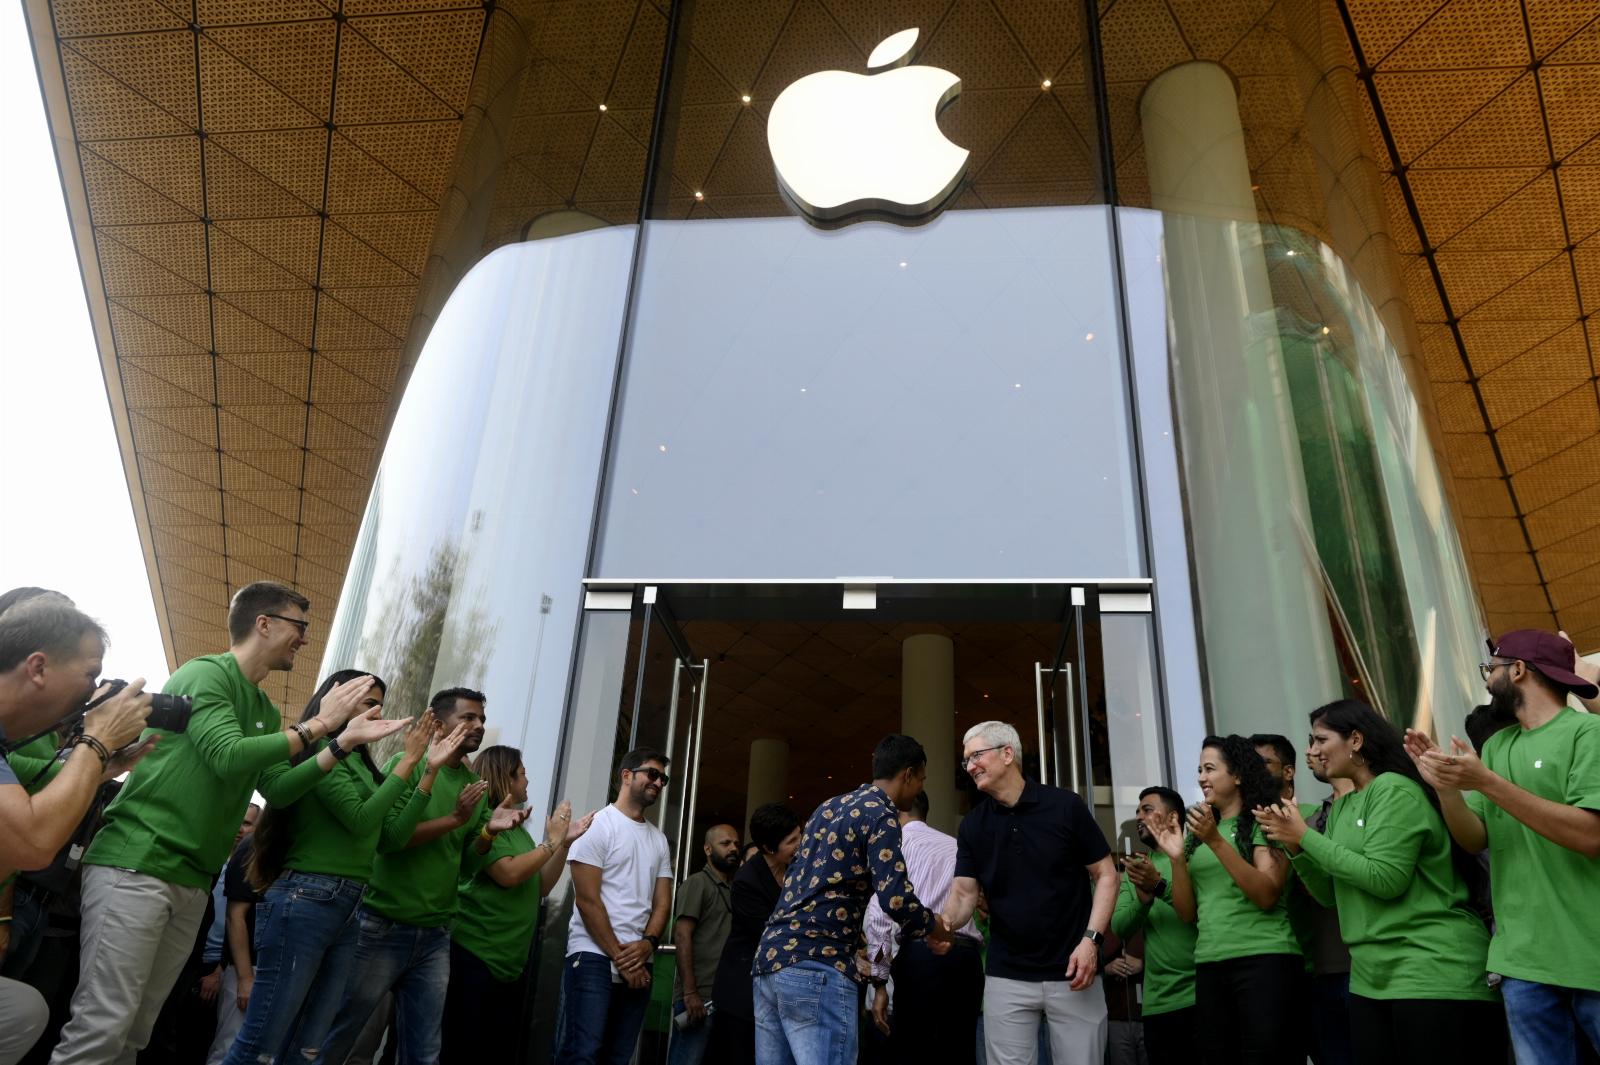 Apple opens its first retail store in India but customer challenges persist